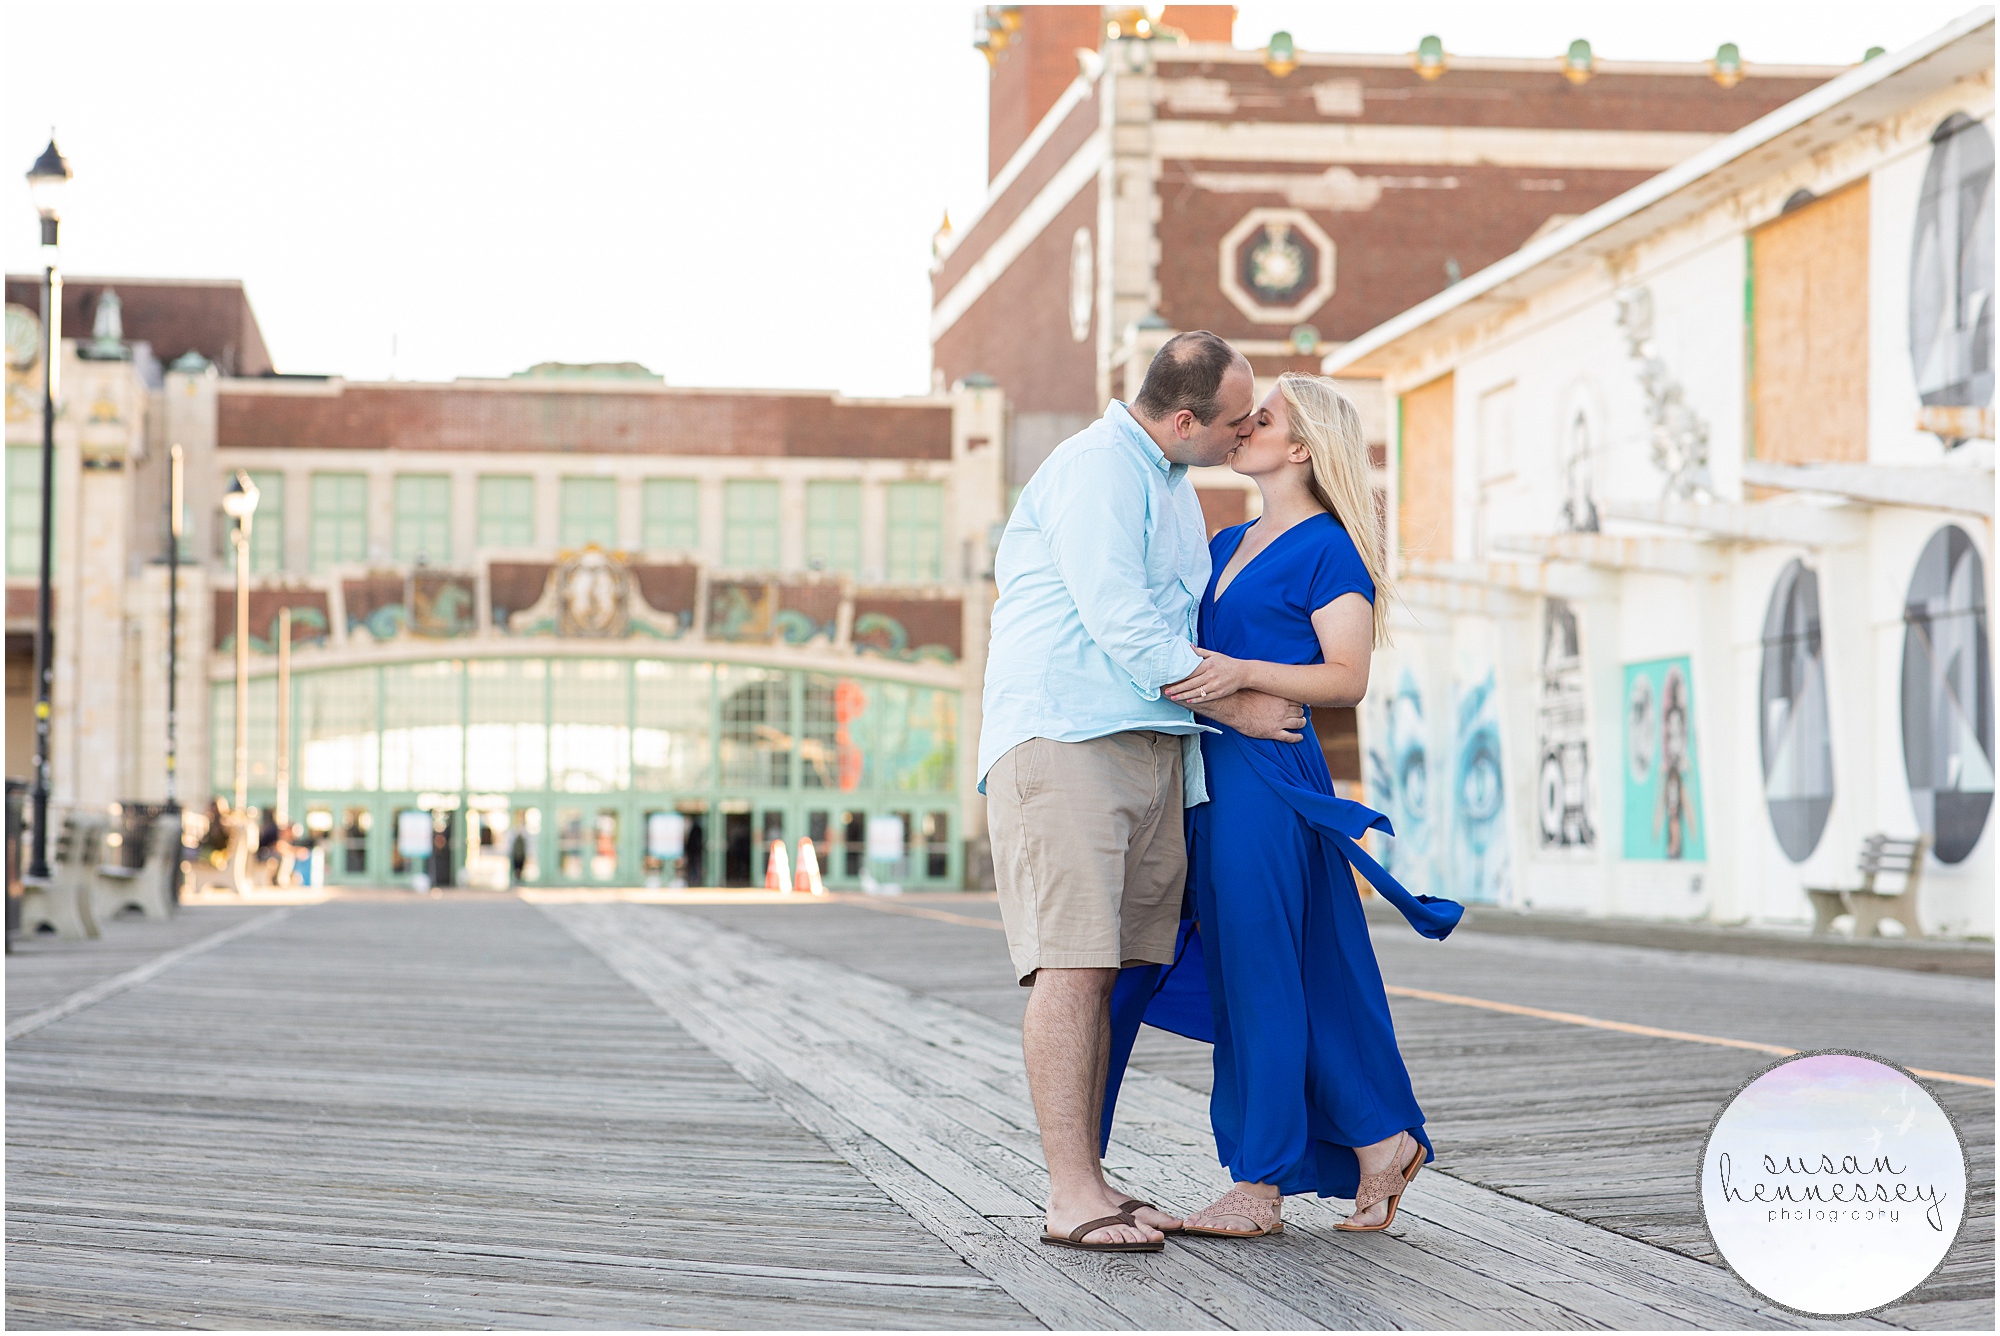 Engagement Session at Asbury Park on the boardwalk